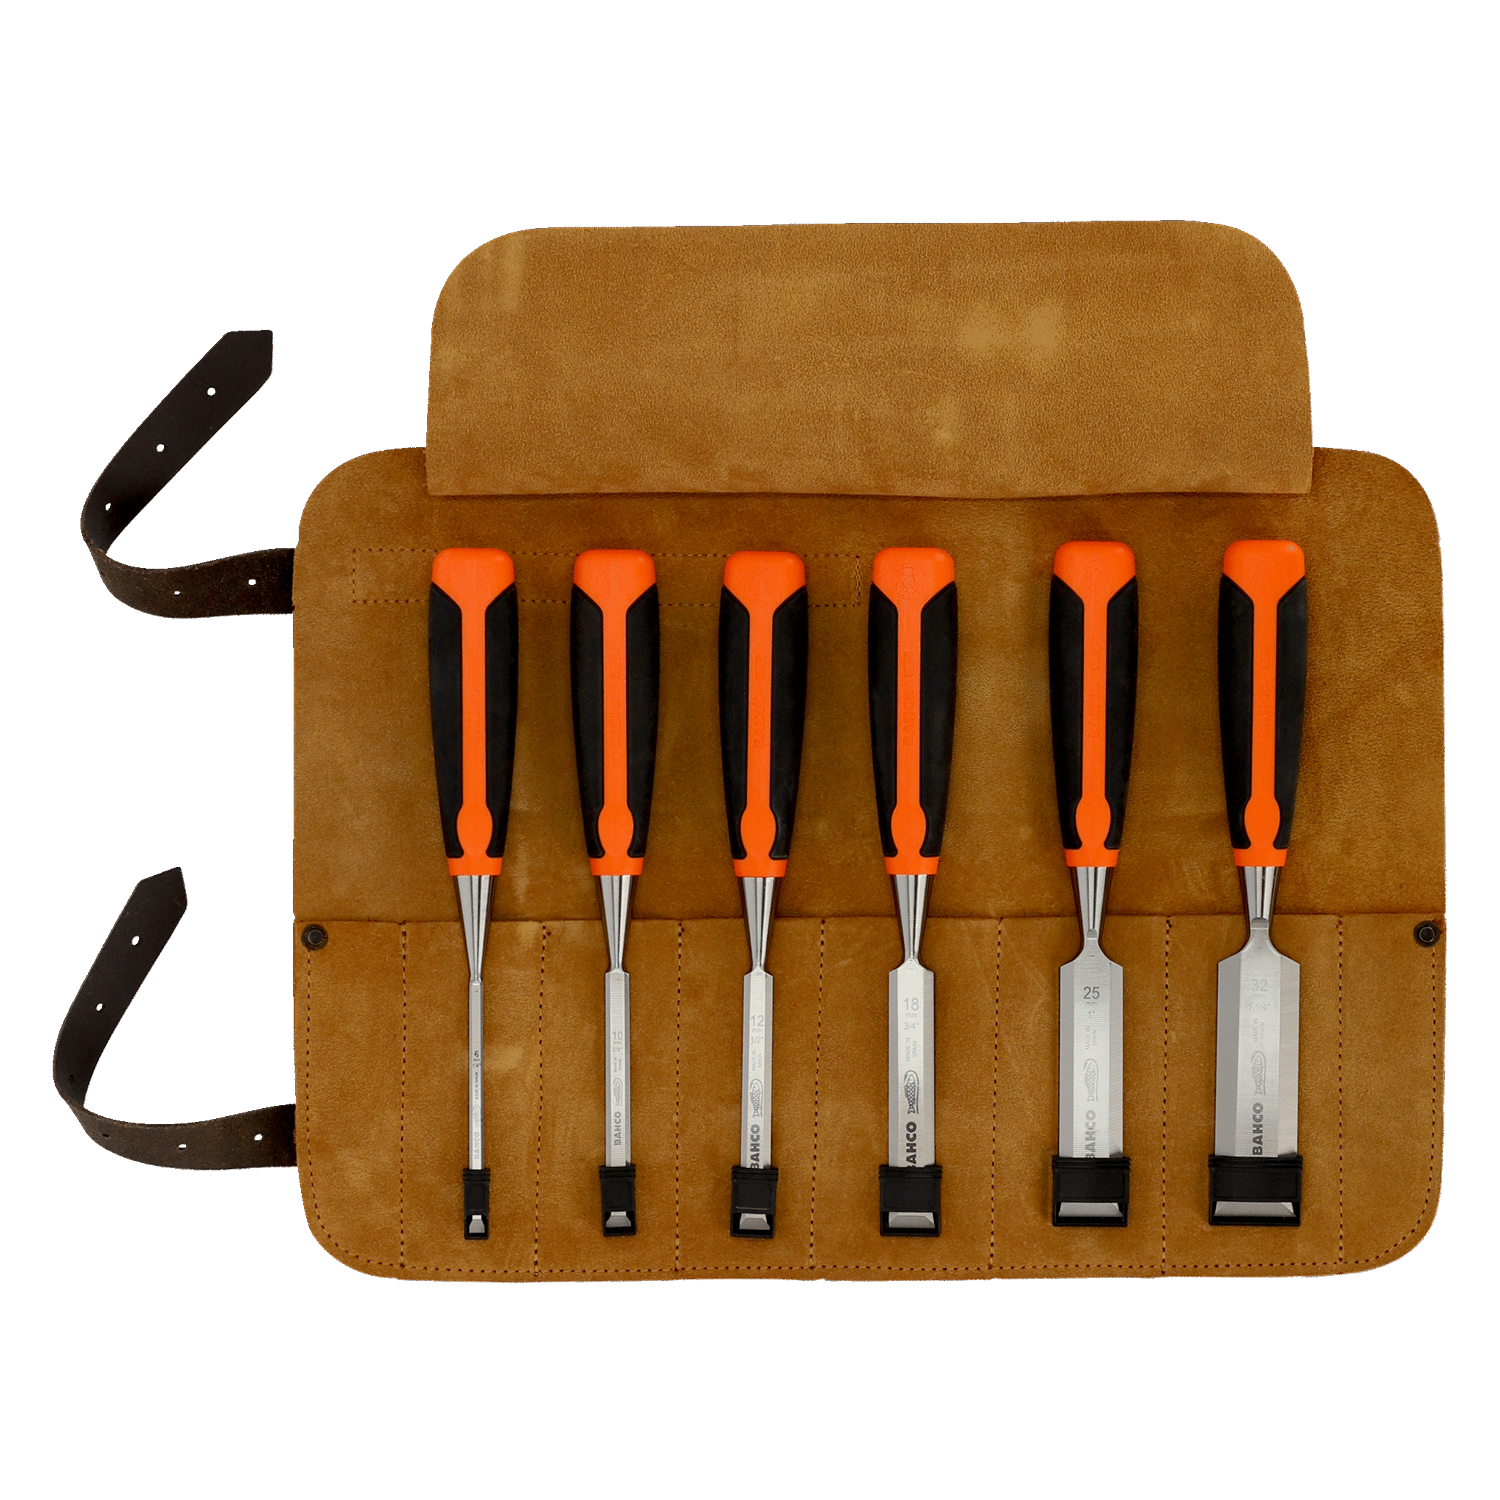 BAHCO 424P-S6-LR Chisel Set with Rubberised Handle 6-32 mm - Premium Chisel Set from BAHCO - Shop now at Yew Aik.